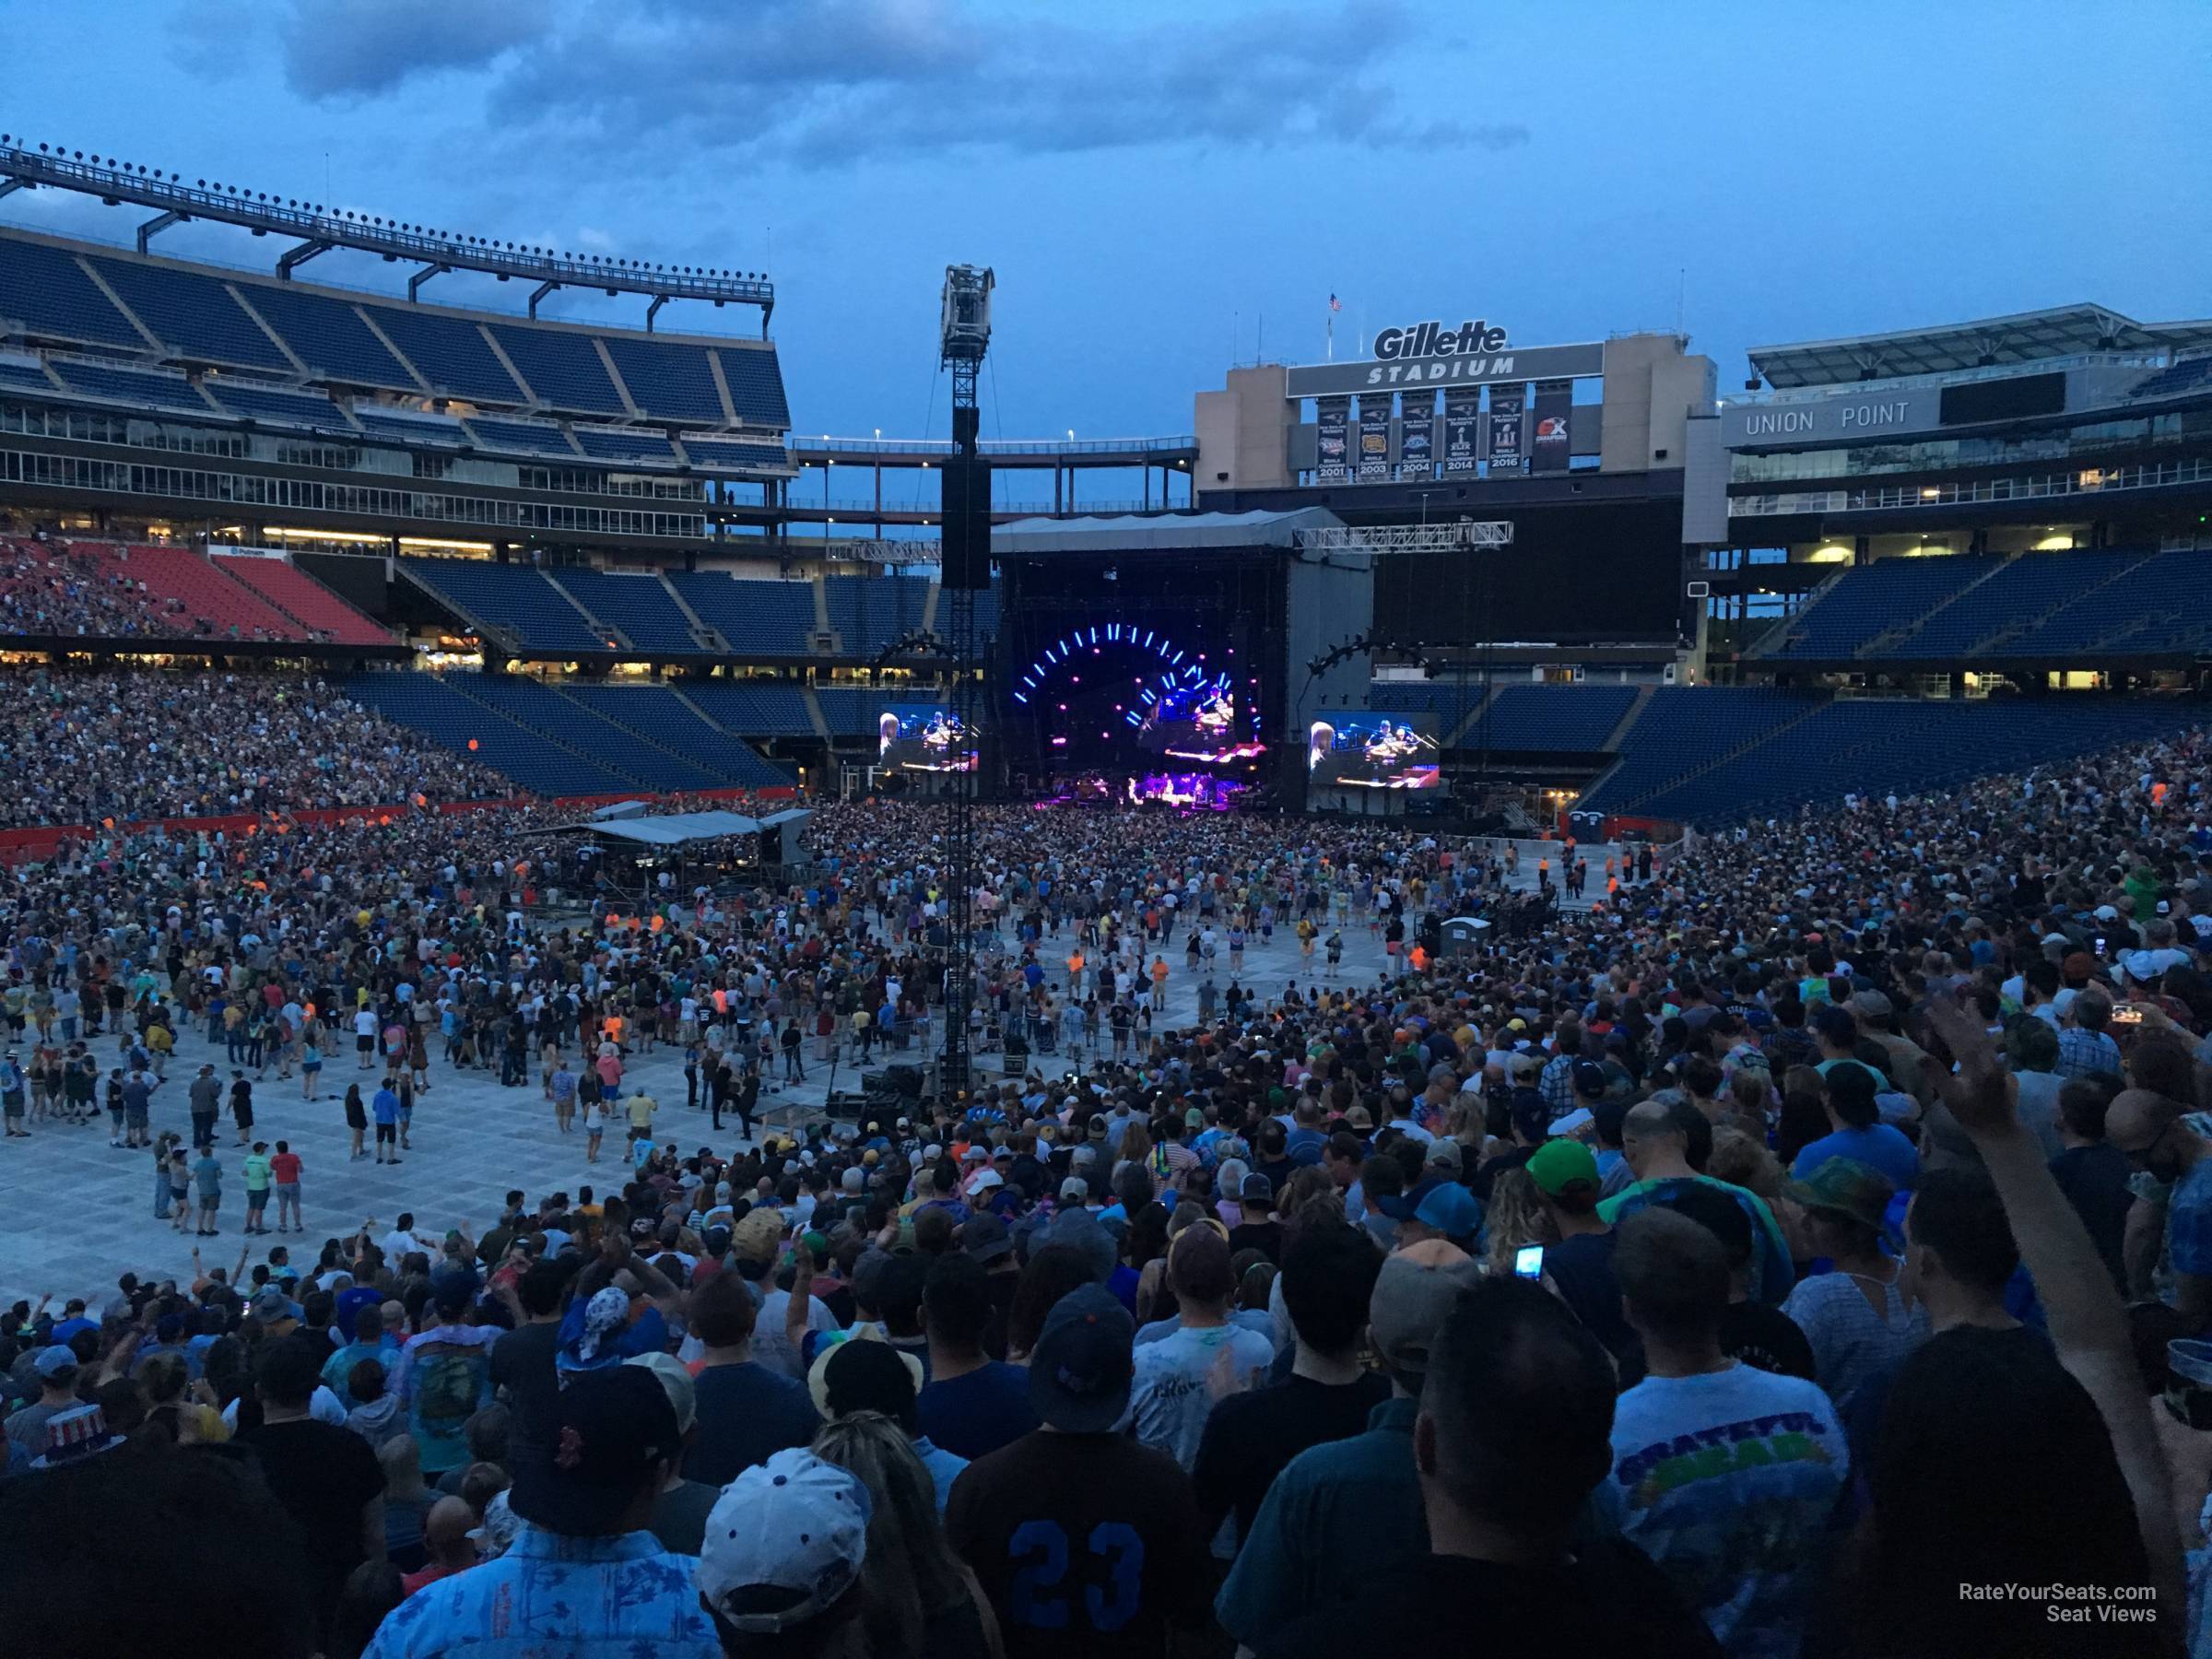 section 137, row 38 seat view  for concert - gillette stadium